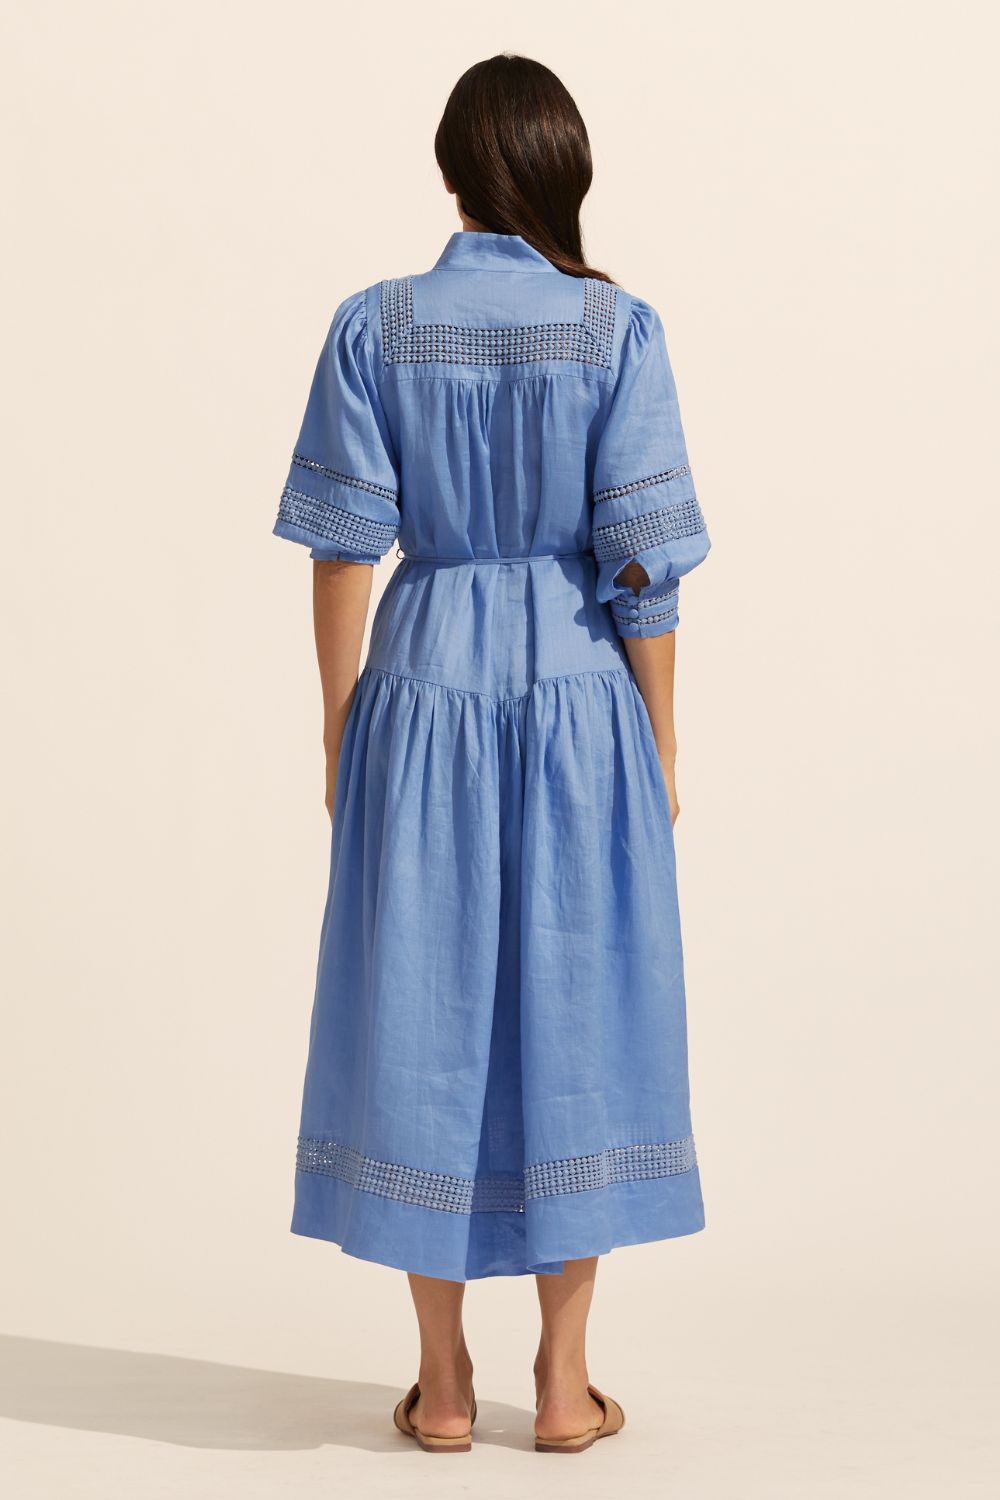 blue, maxi dress, button through, cuffed sleeves, self tie belt, embroidered detailing, high neckline, back image